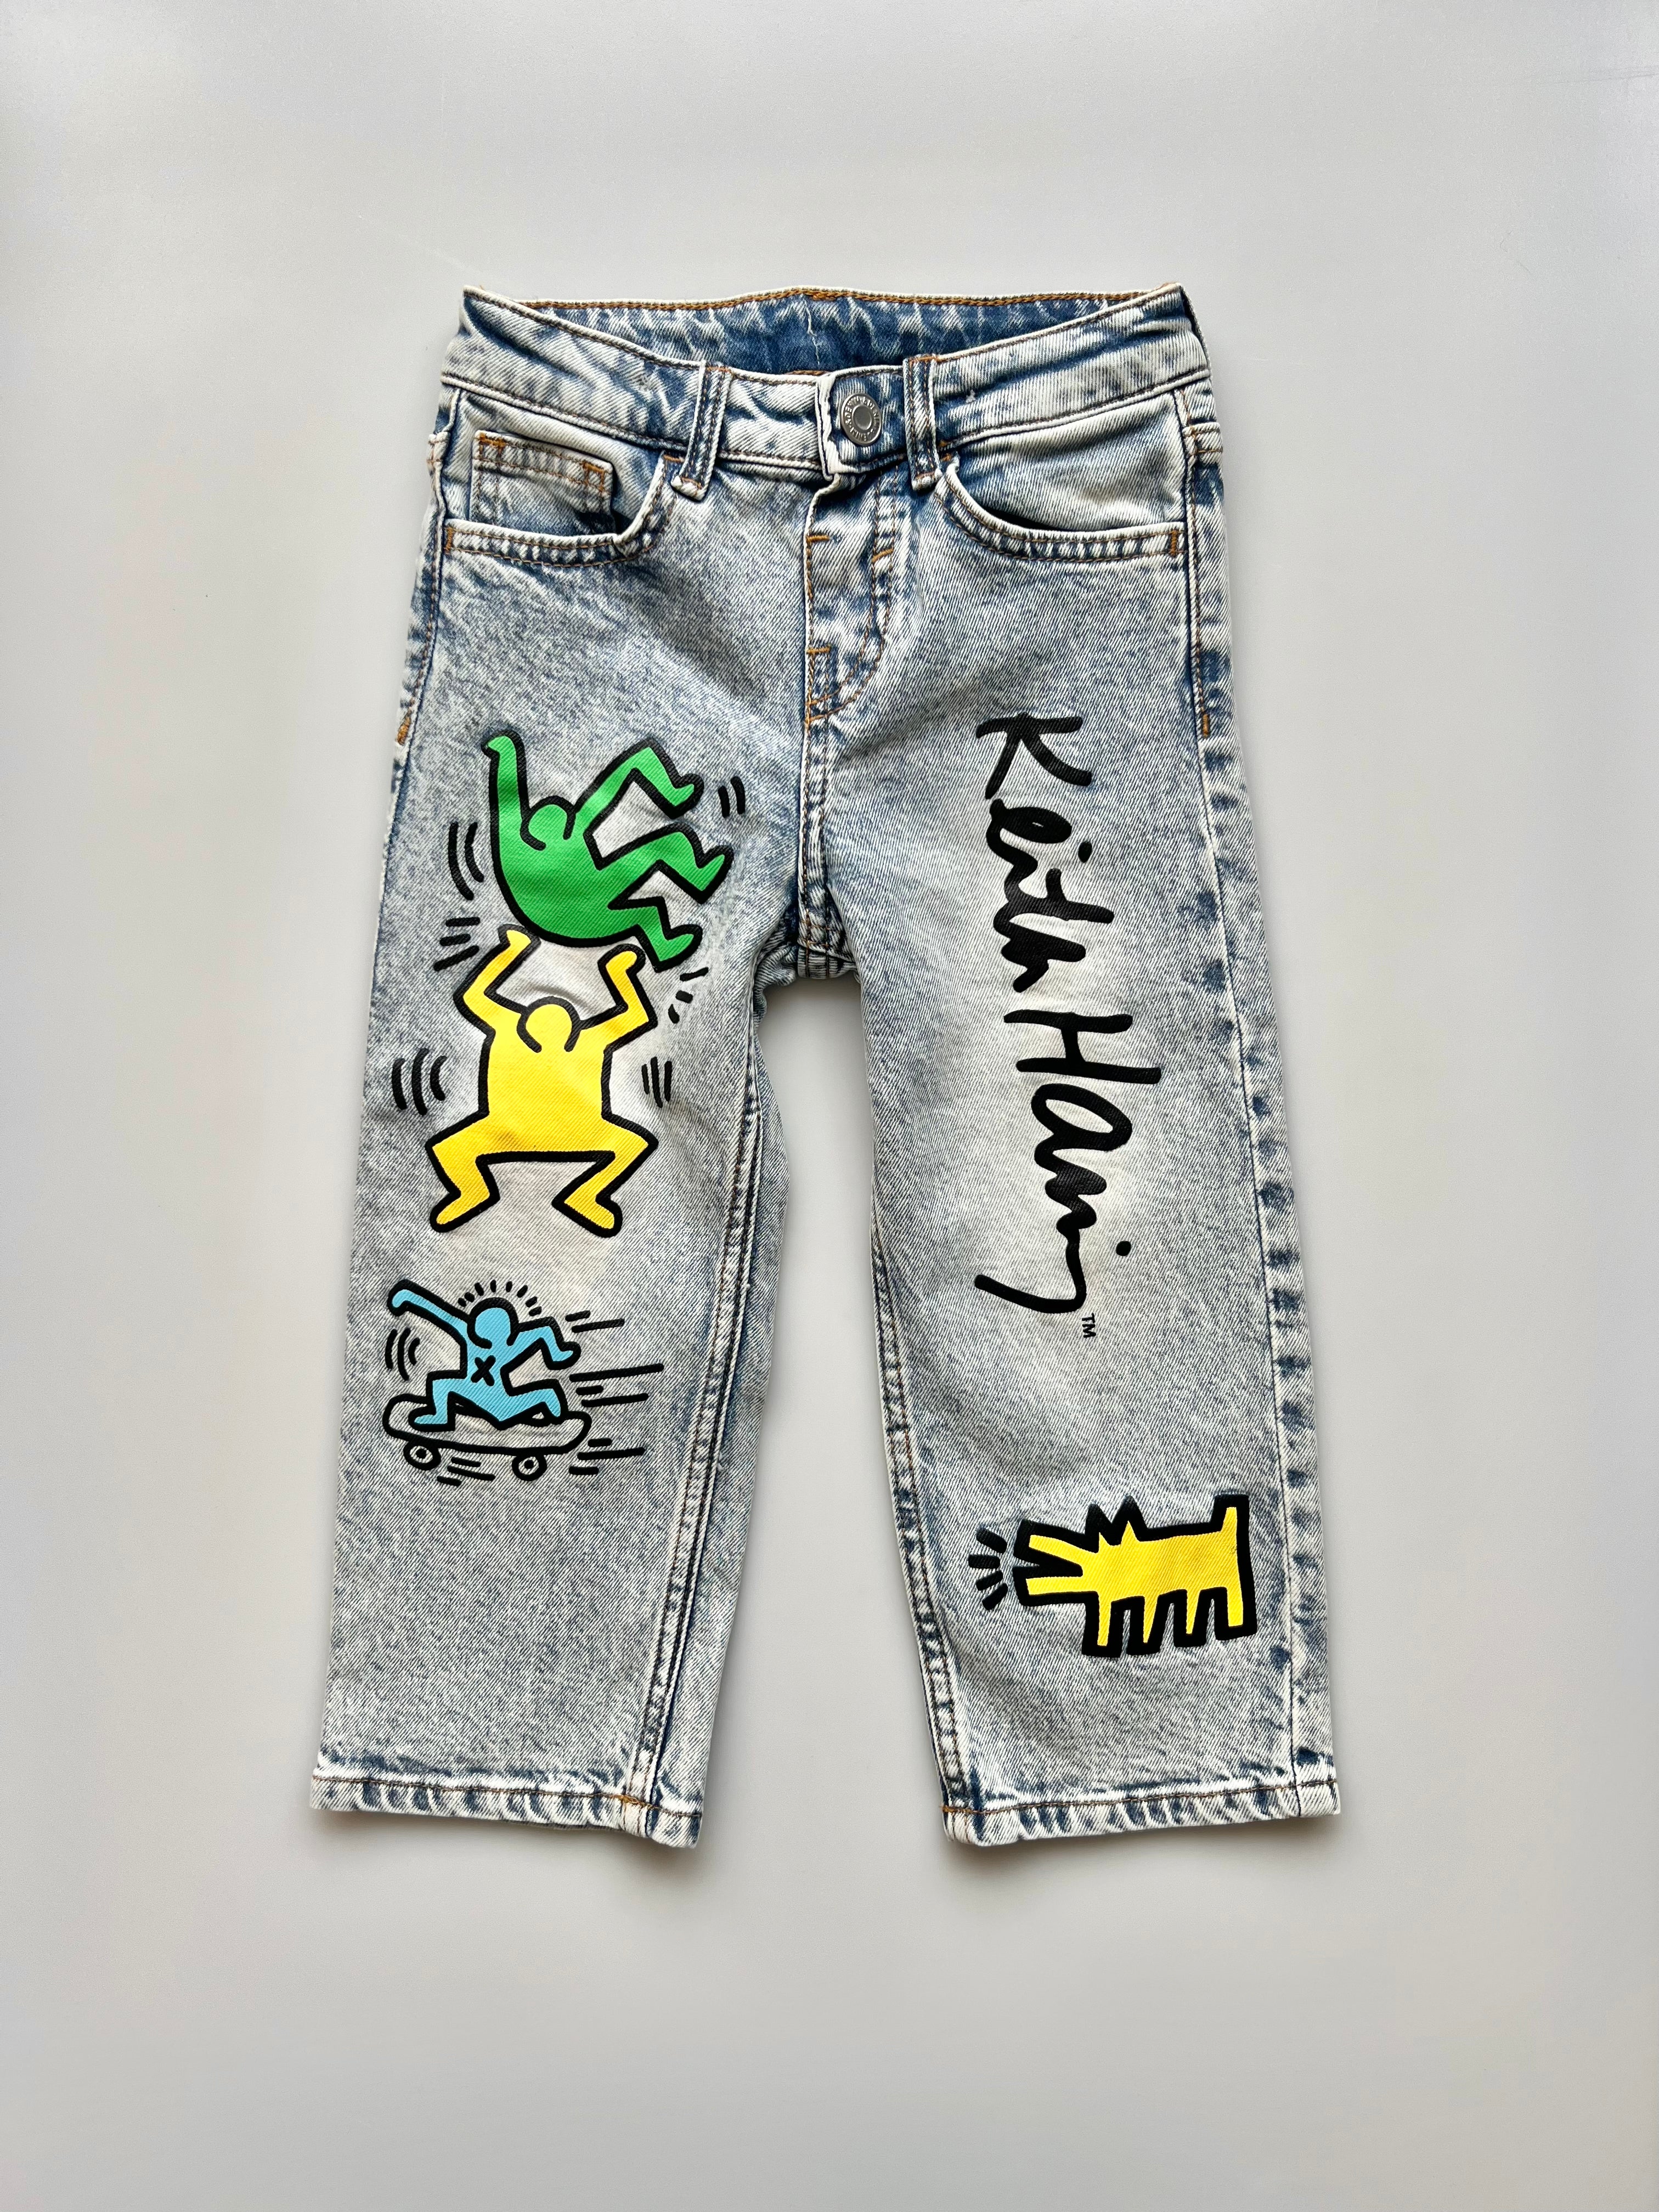 Keith Haring x HM Jeans Age 2